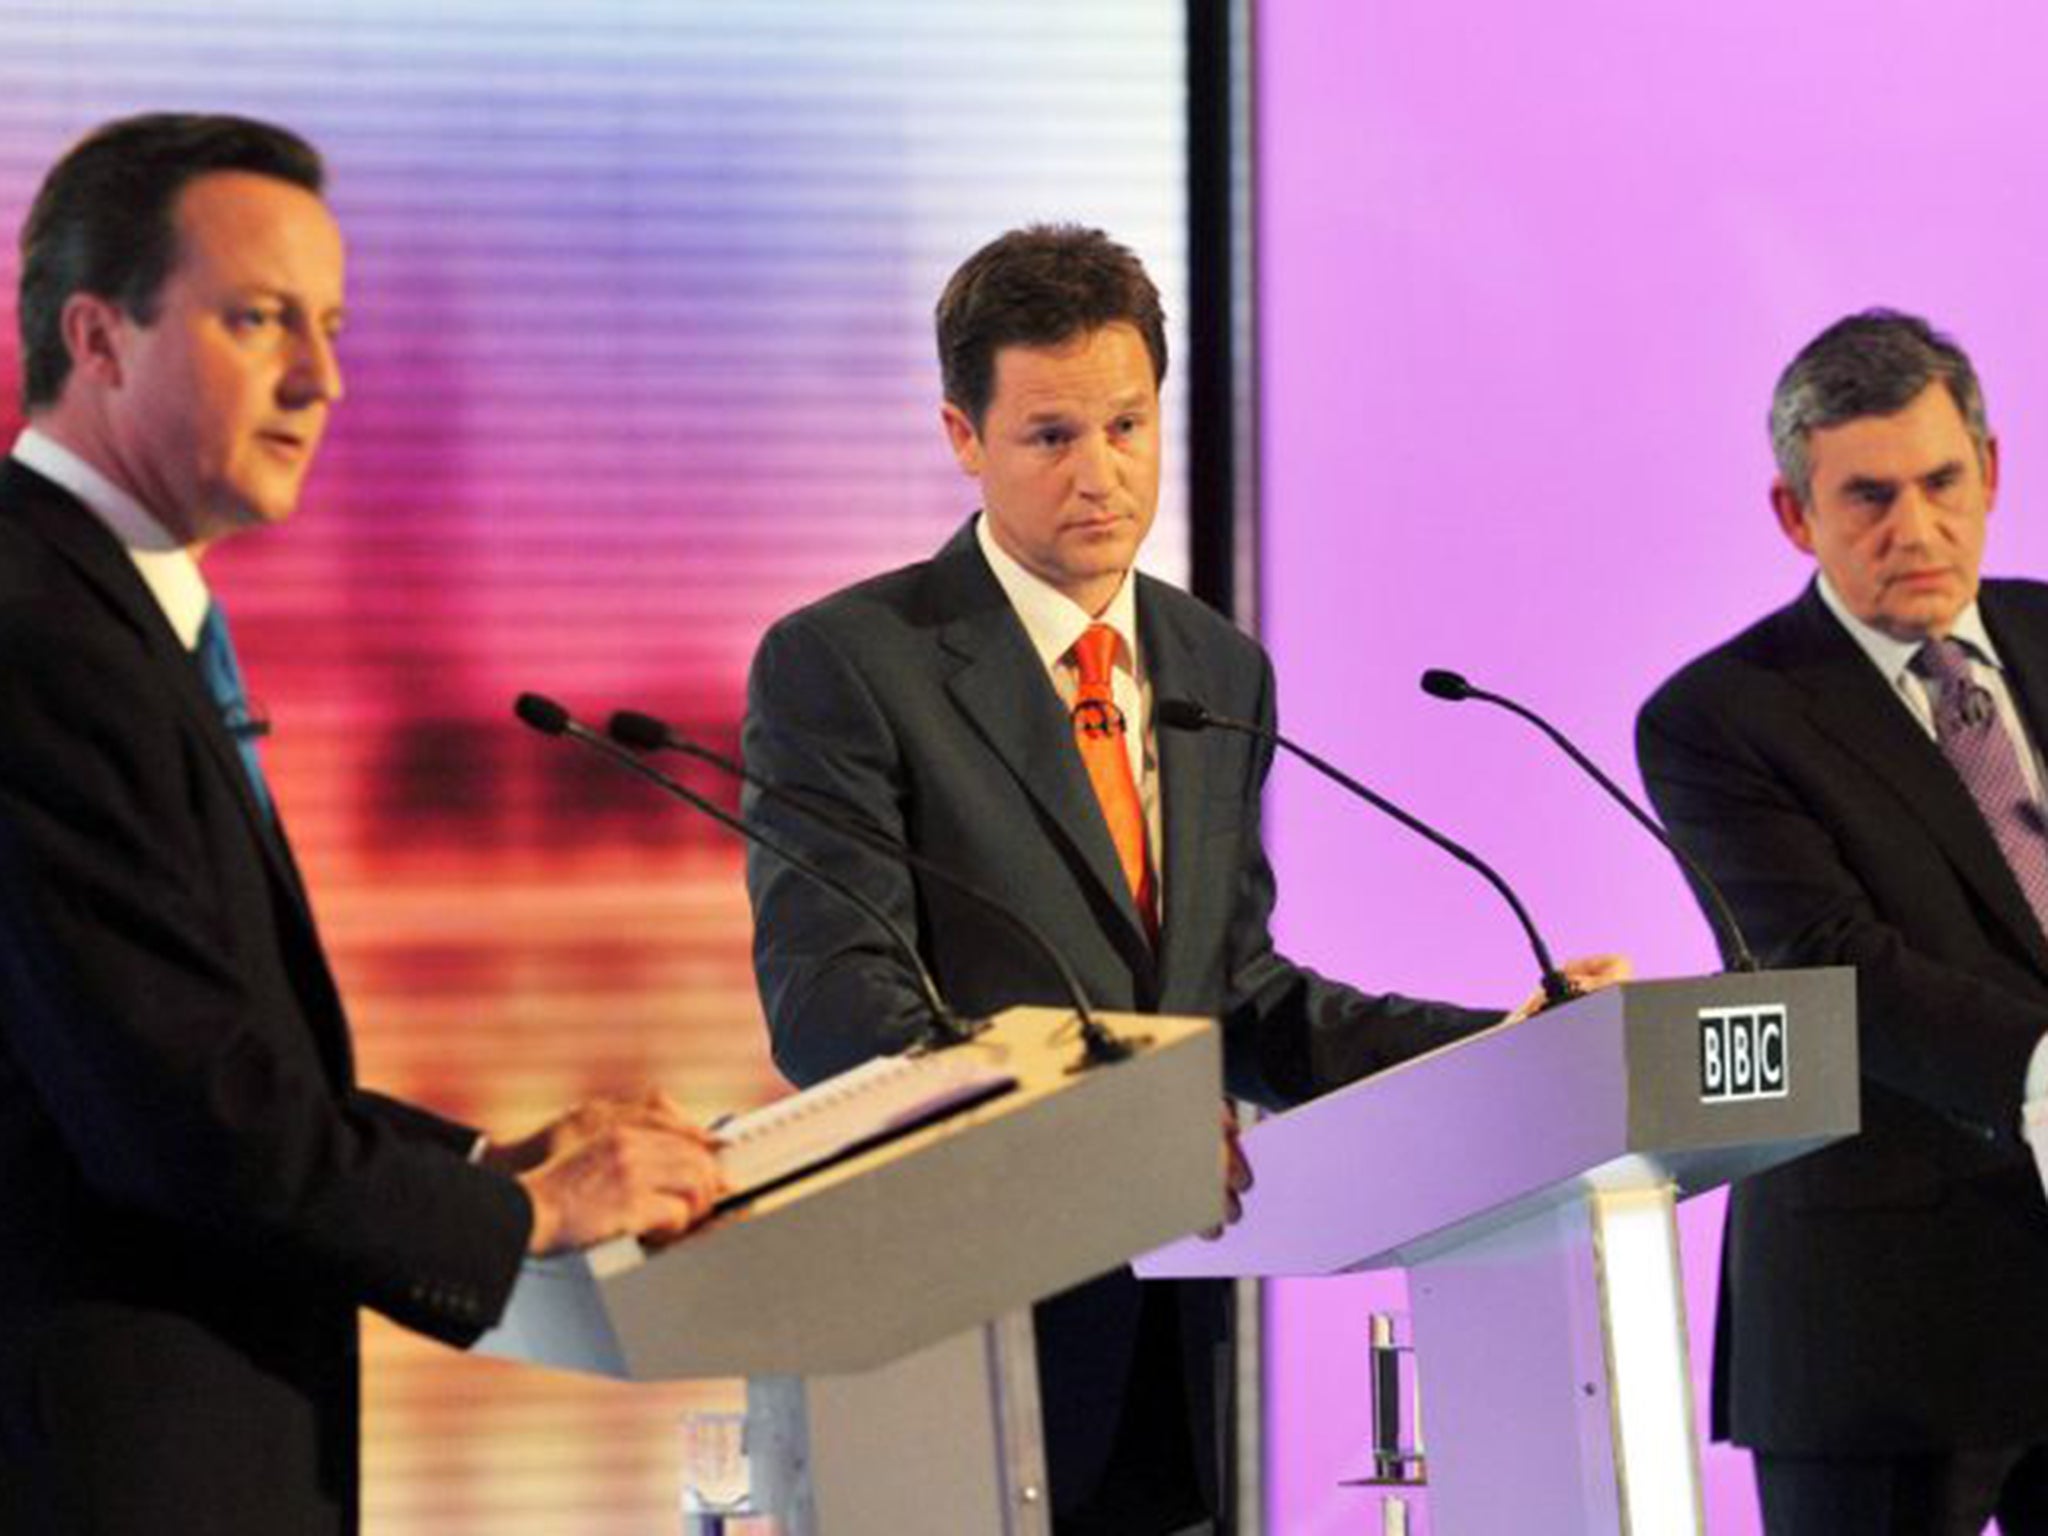 Cameron, Clegg and Brown took part in the 2010 televised debates